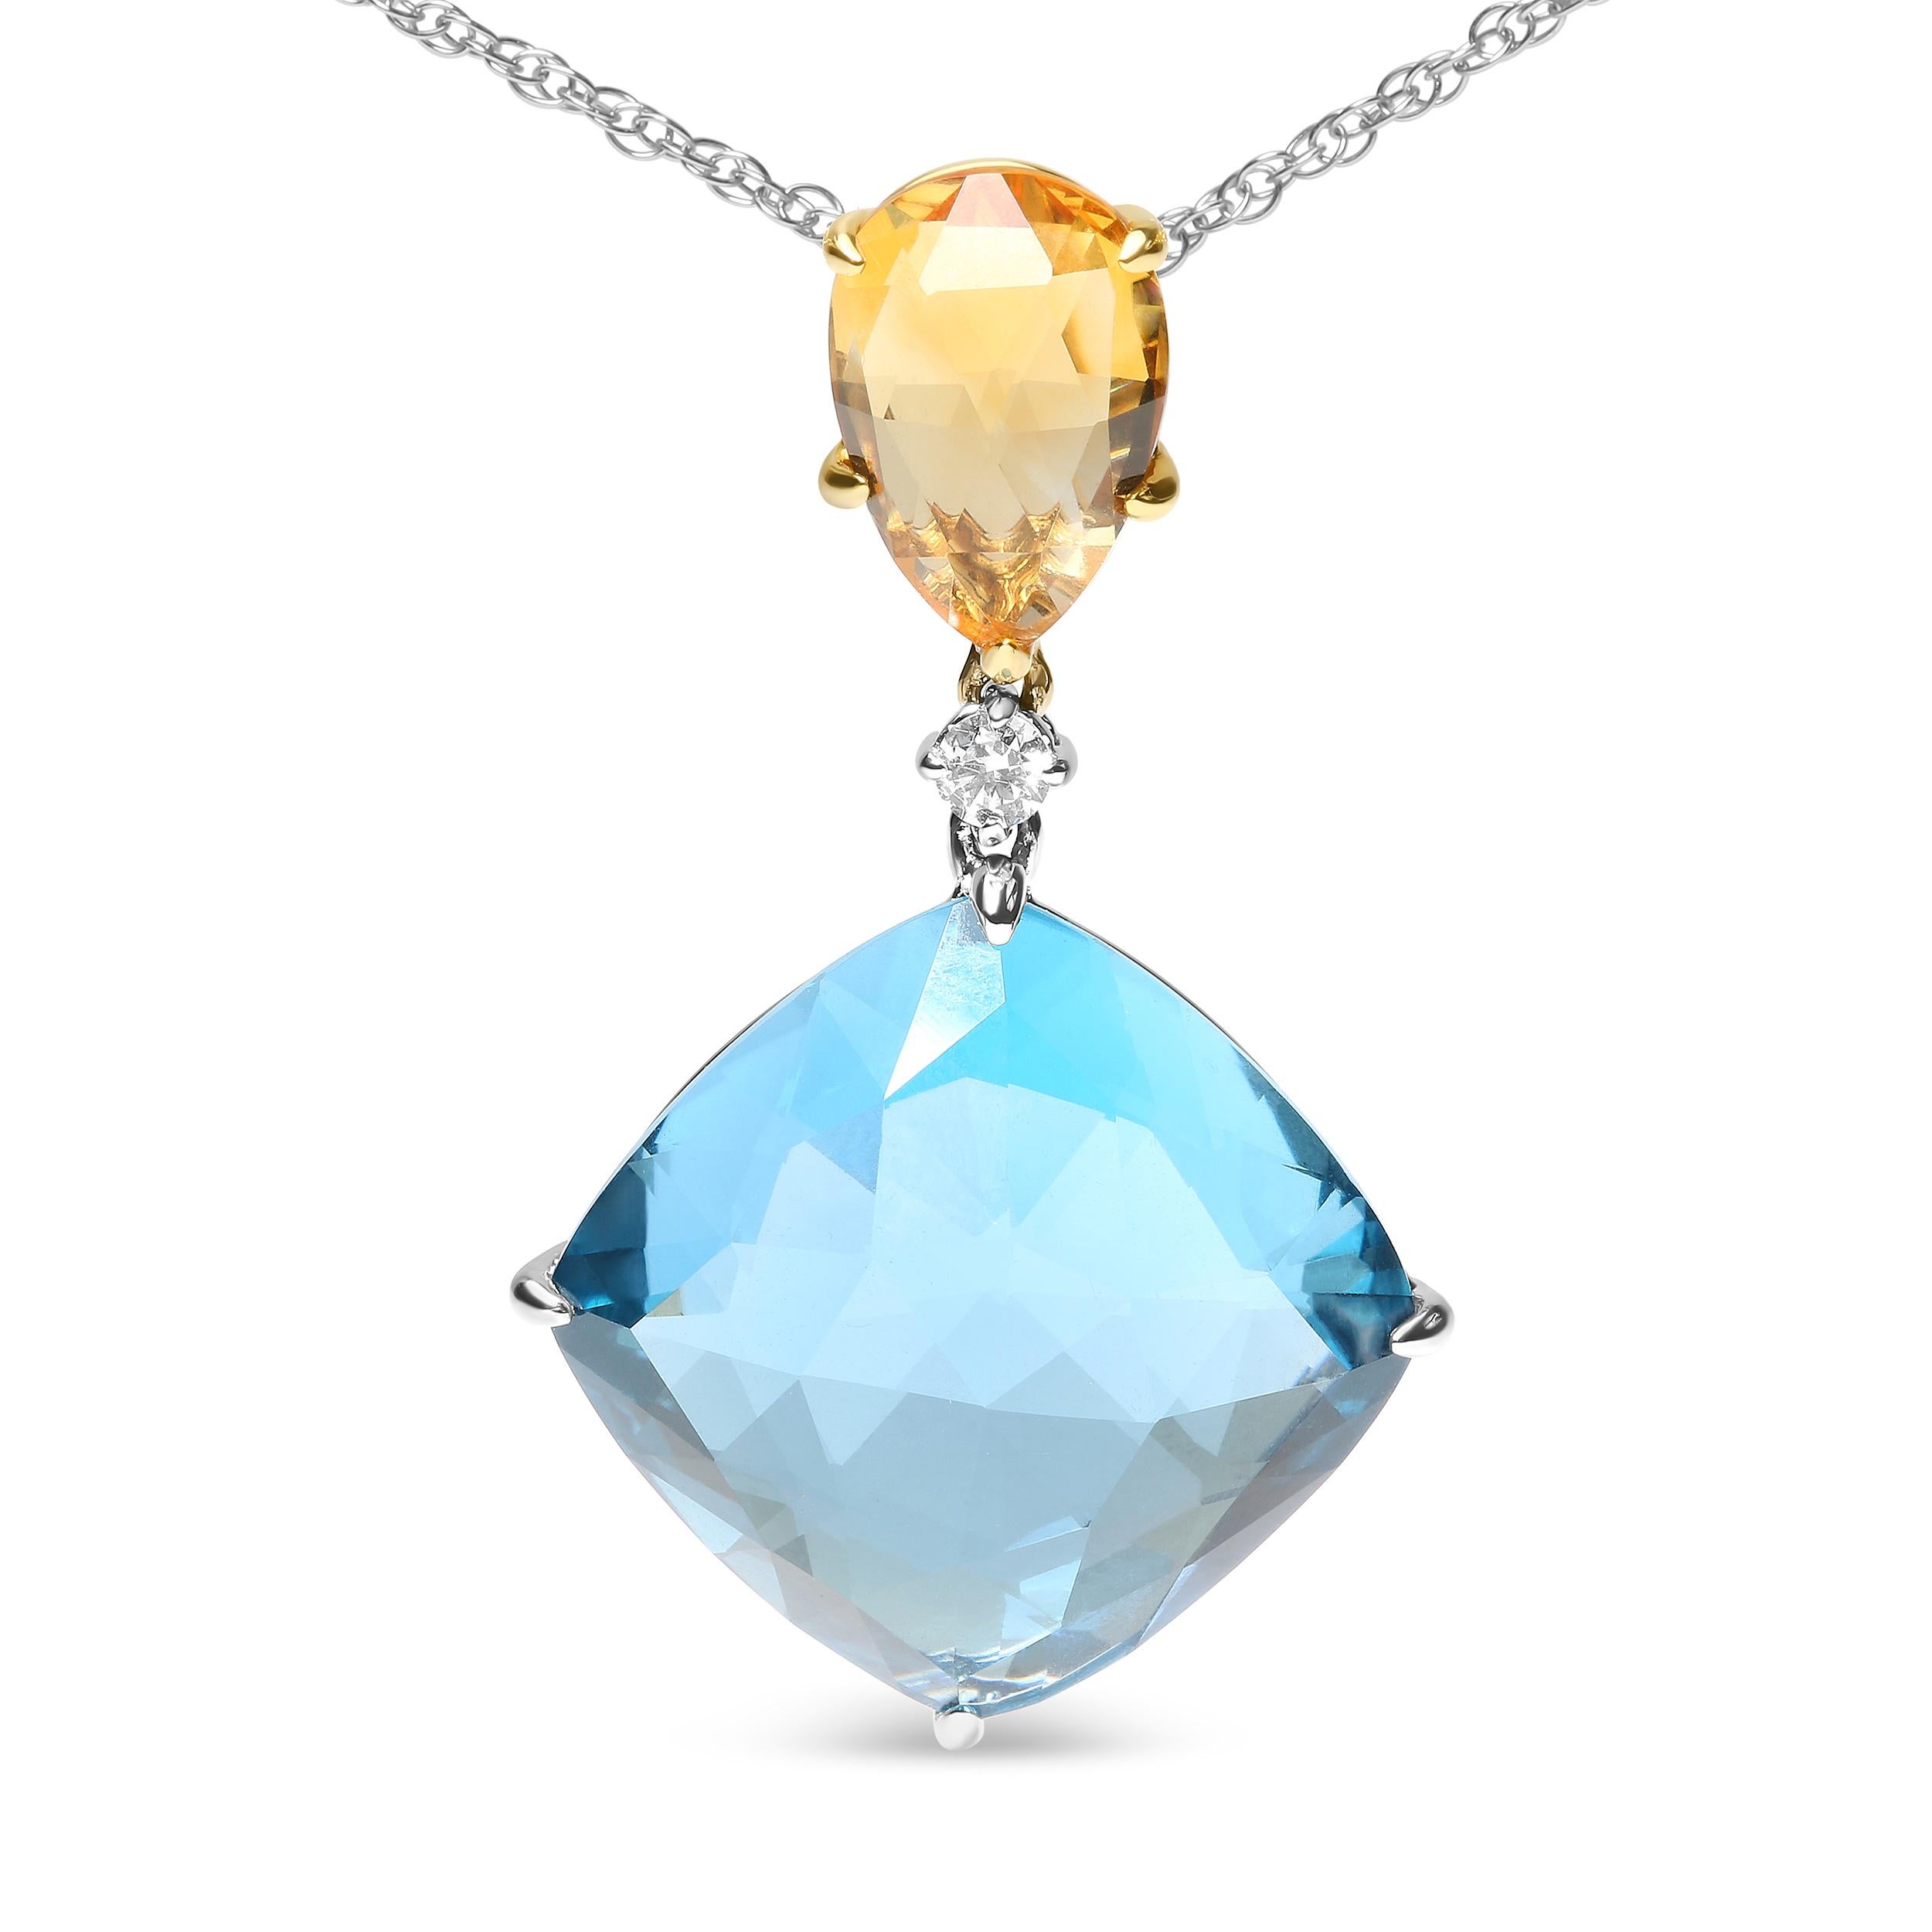 Unleash your inner goddess wearing this marvelous pendant necklace made from genuine 18k white and yellow gold with natural gemstones. At the bail nestled a radiant 1.2mm pear-cut heat-treated yellow citrine nestled in a 5-prong setting. Directly